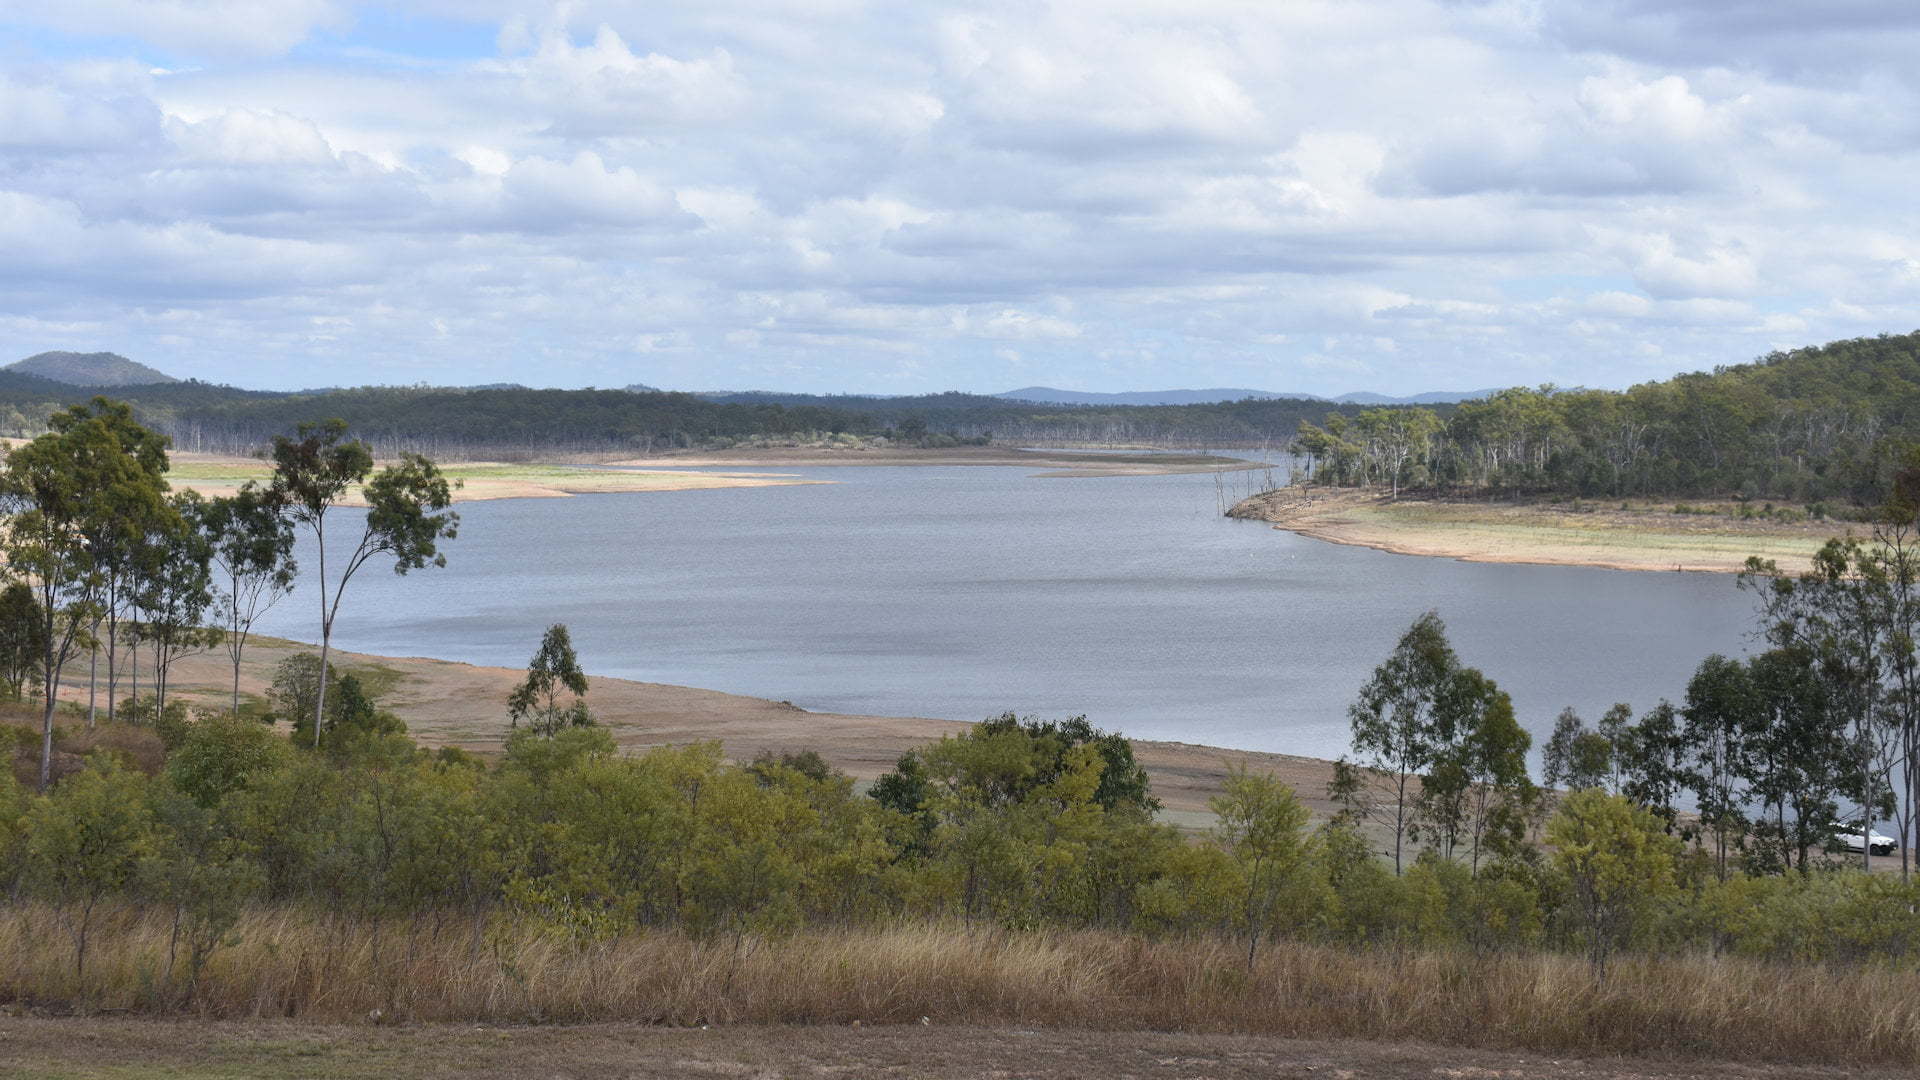 View of the lake at Paradise Dam in Queensland